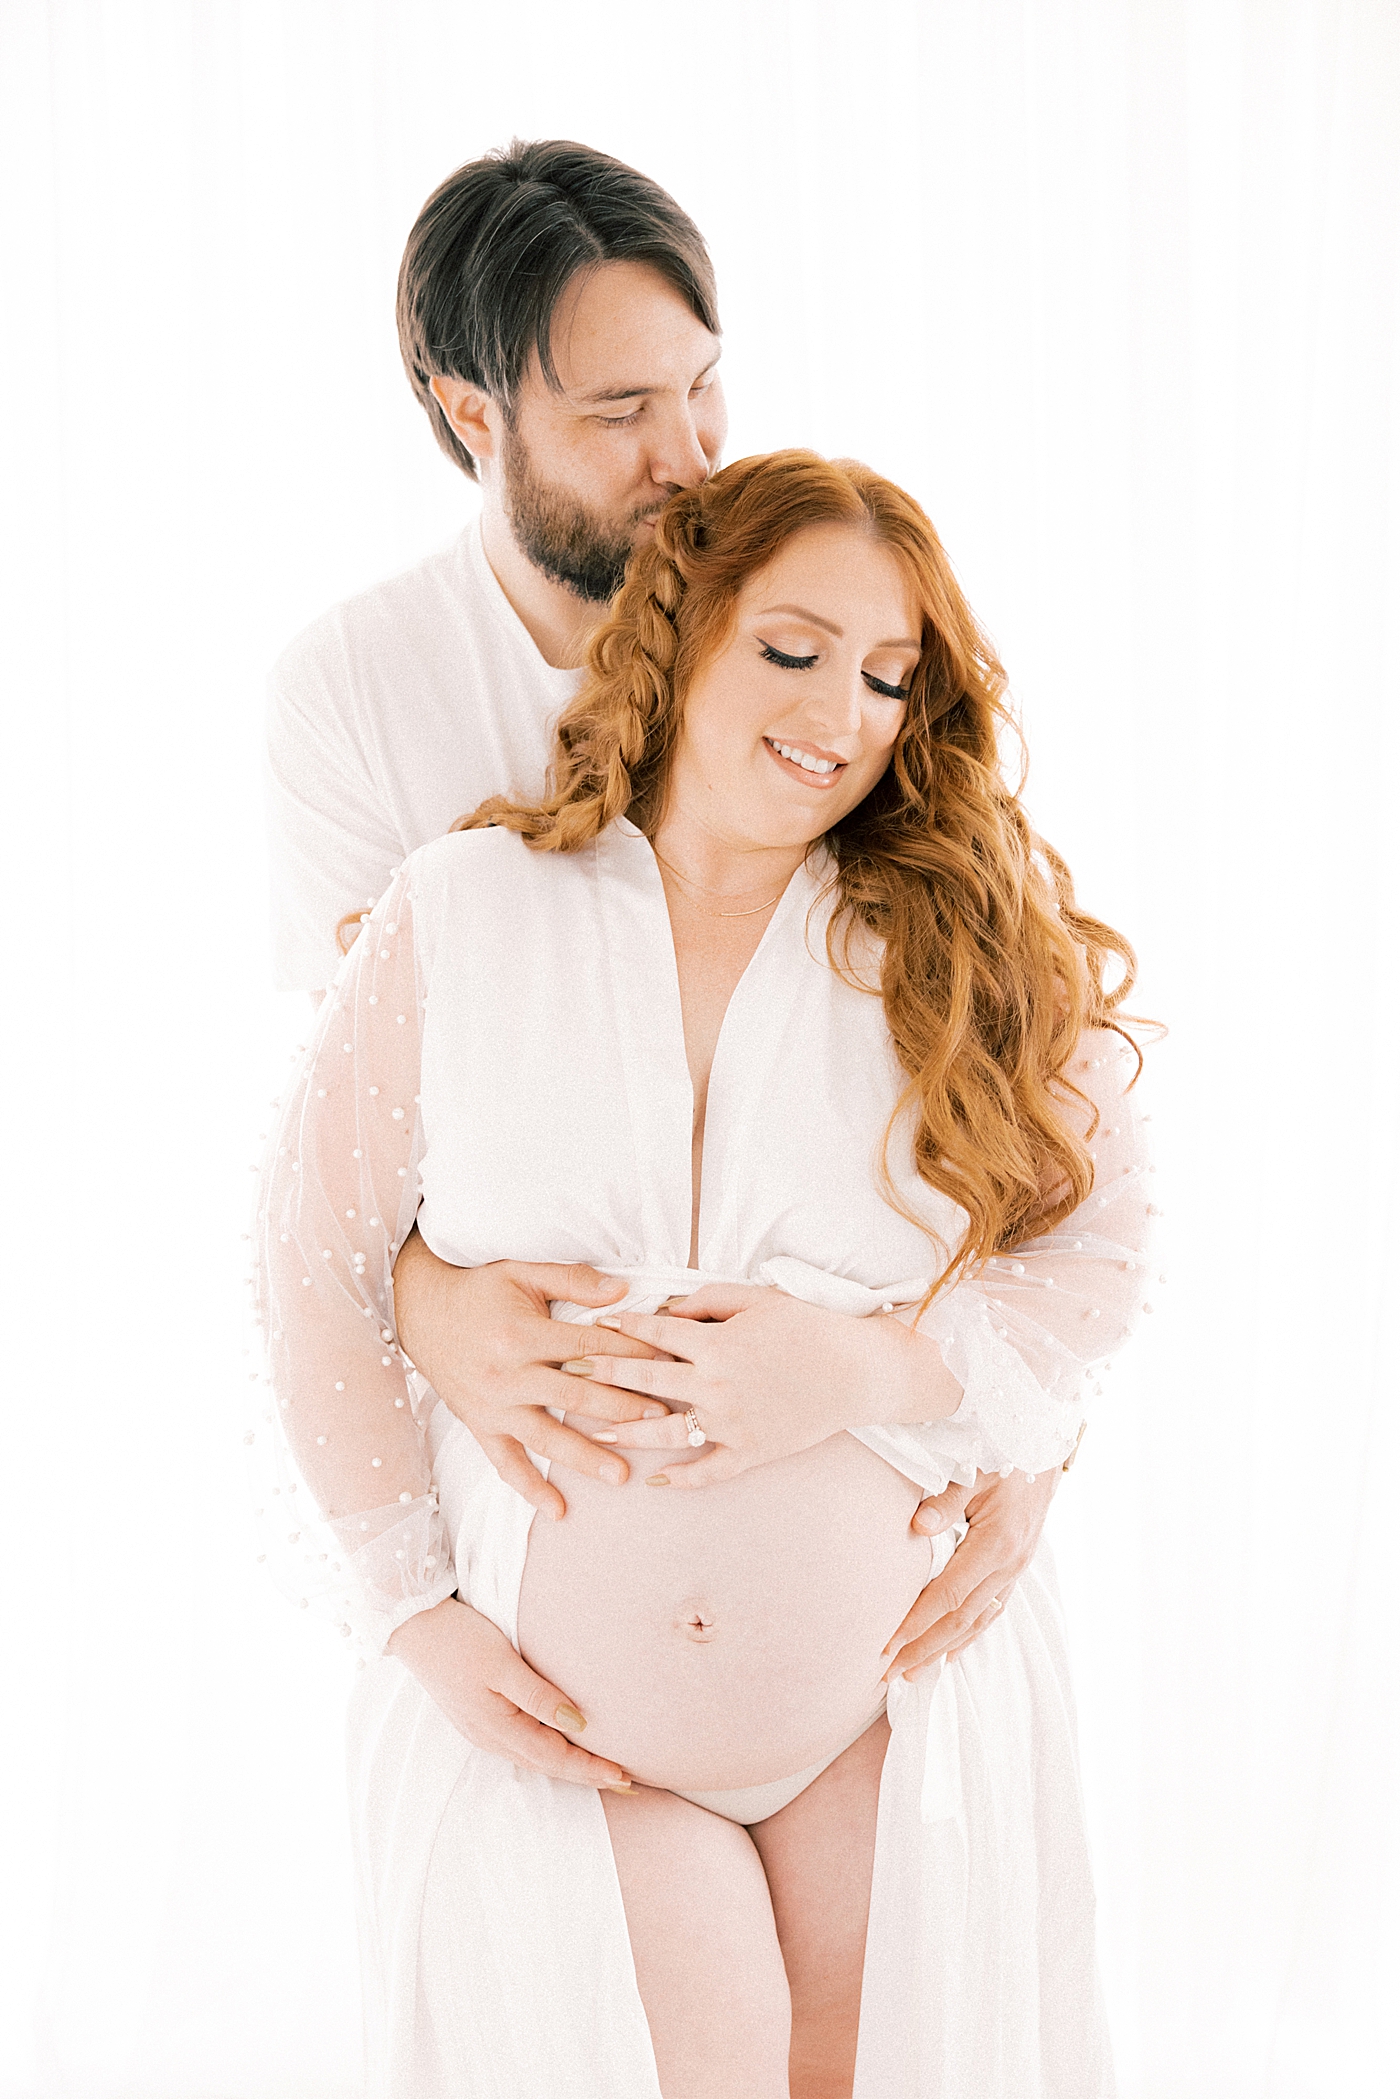 during their Newport Beach Maternity Session | Image by Halleigh Hill 